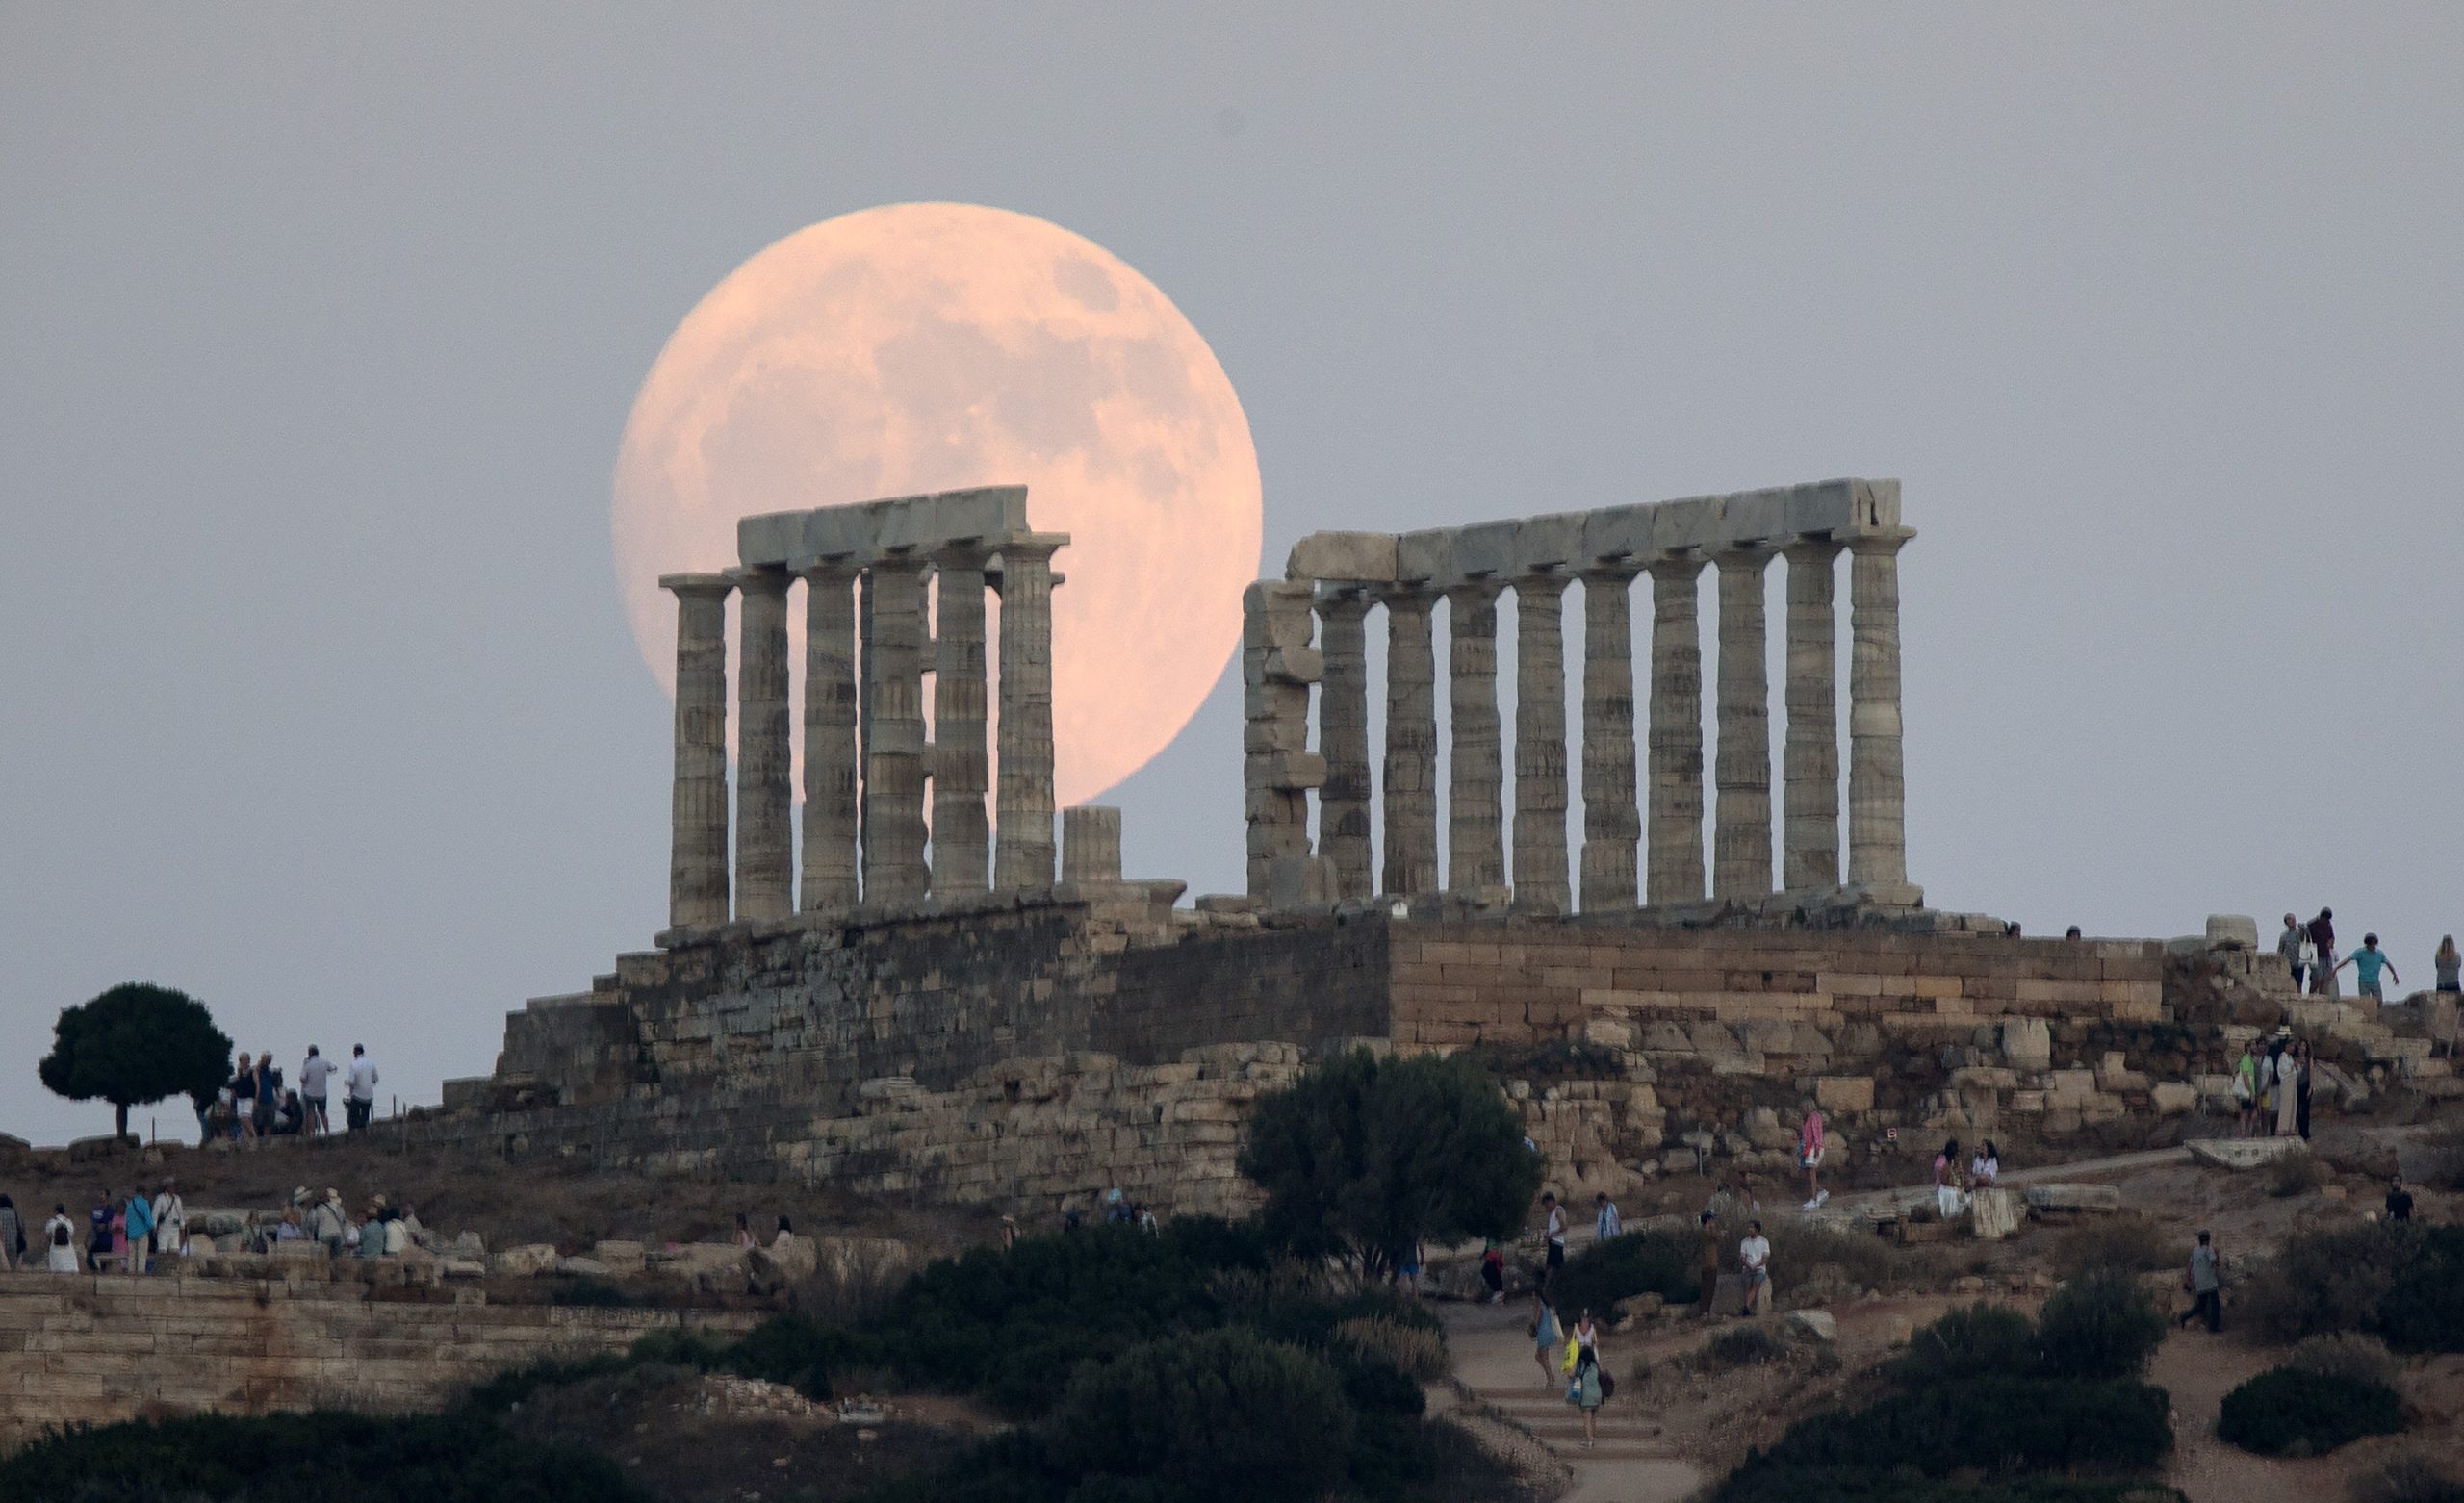 July’s Buck Moon: The Best Images Of July’s Supermoon